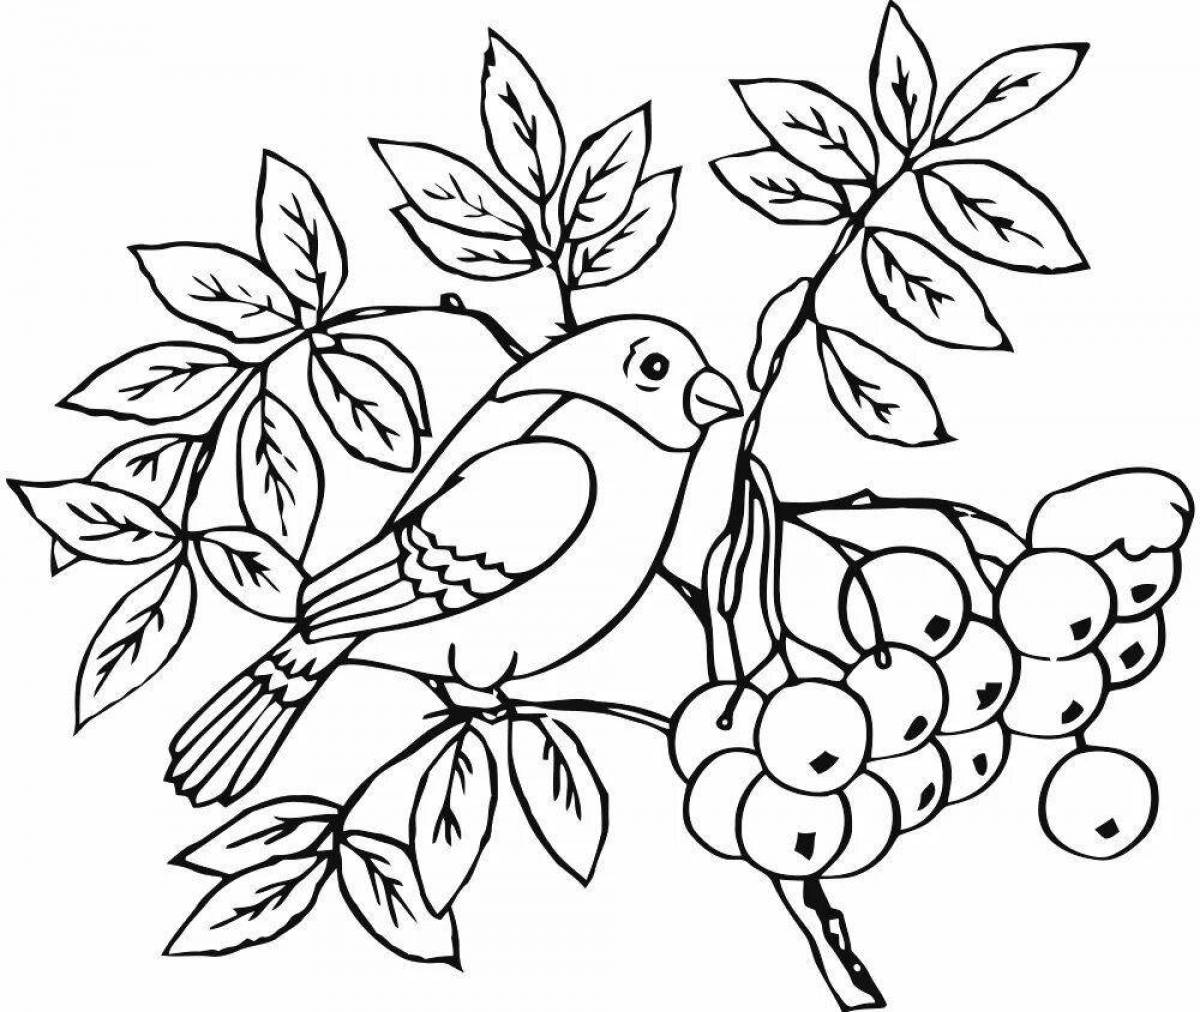 Unique drawing of a bullfinch coloring for kids